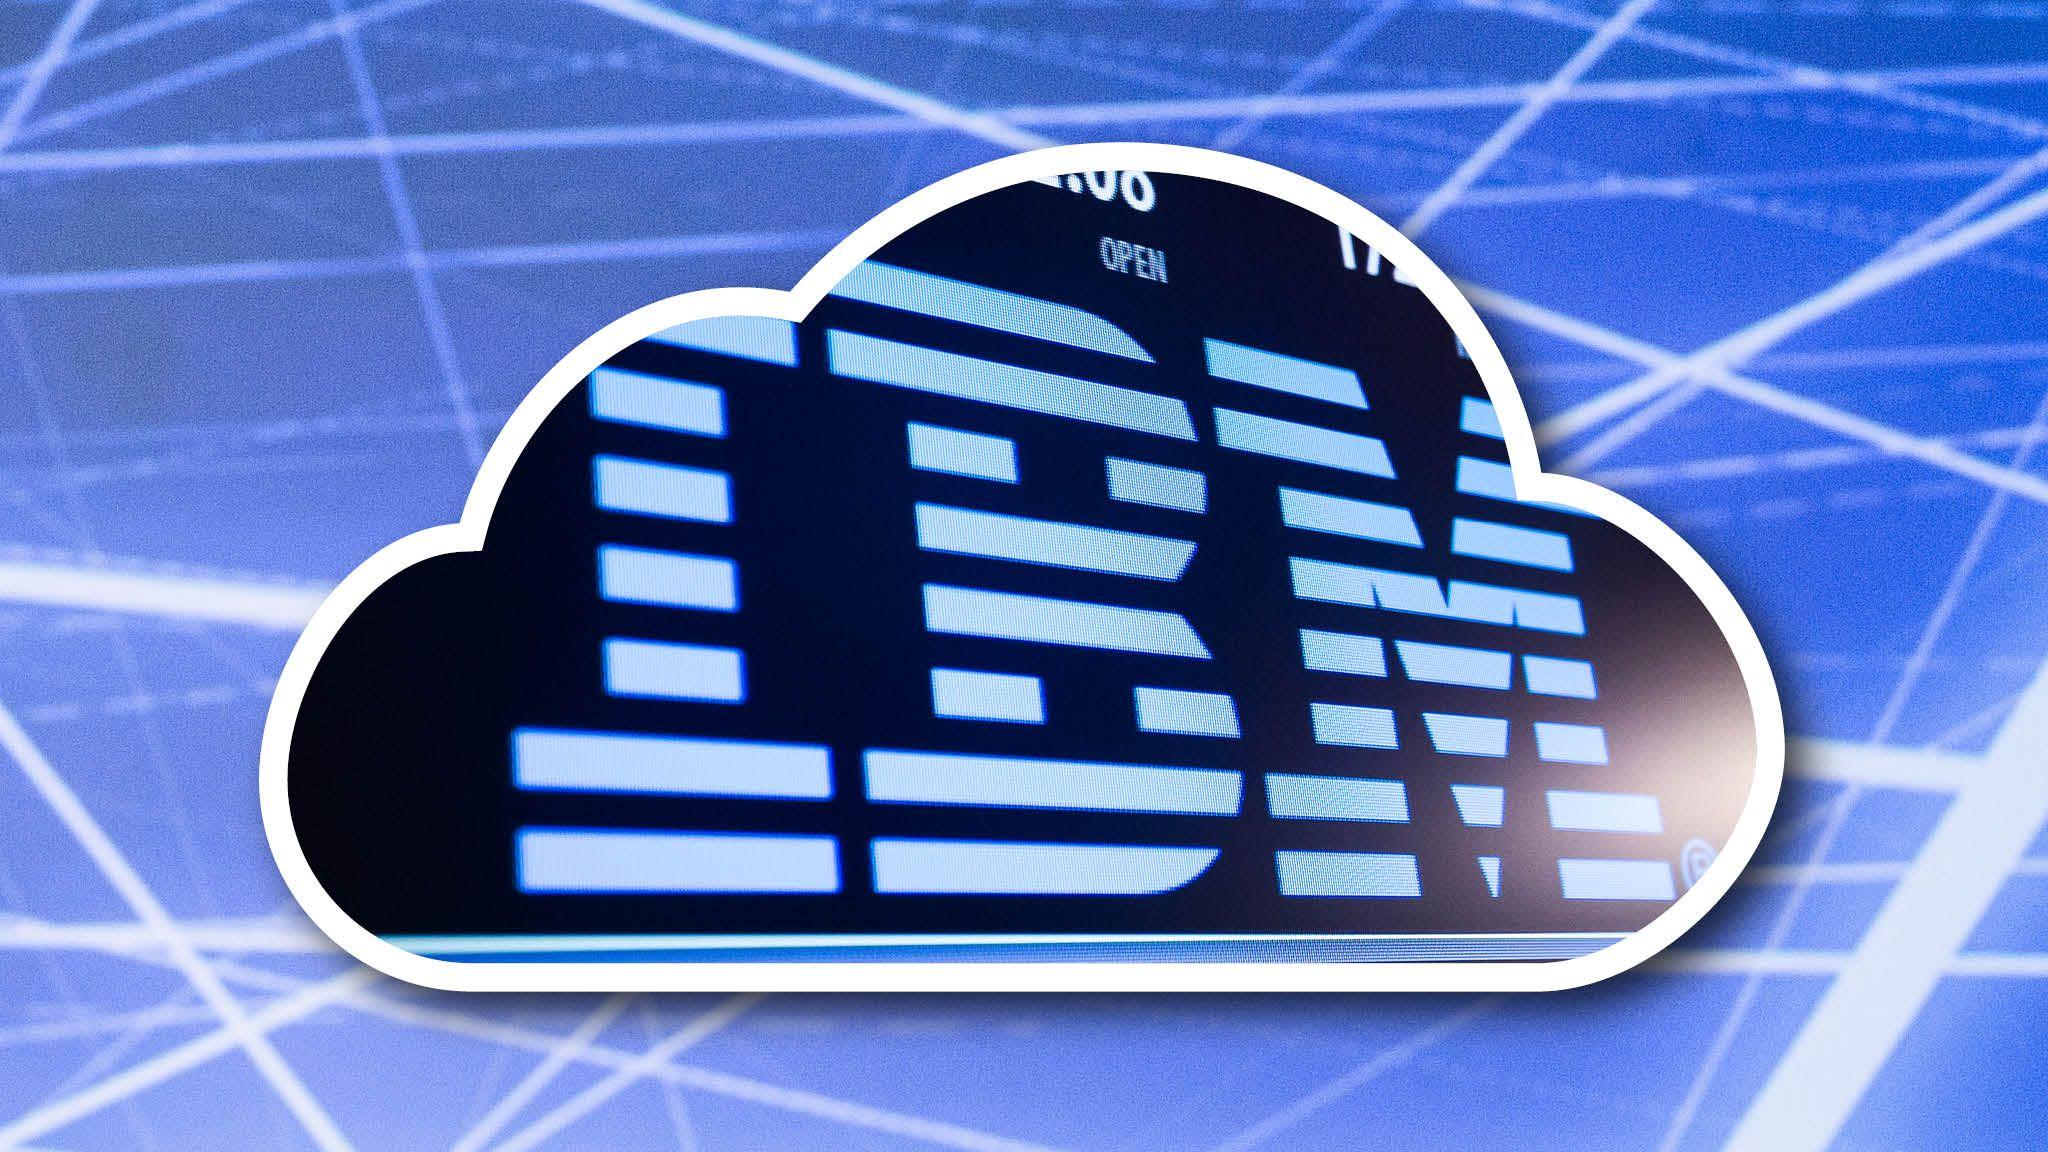 IBM Corp Logo - IBM Corp. extending their Public Cloud to the Private Cloud -